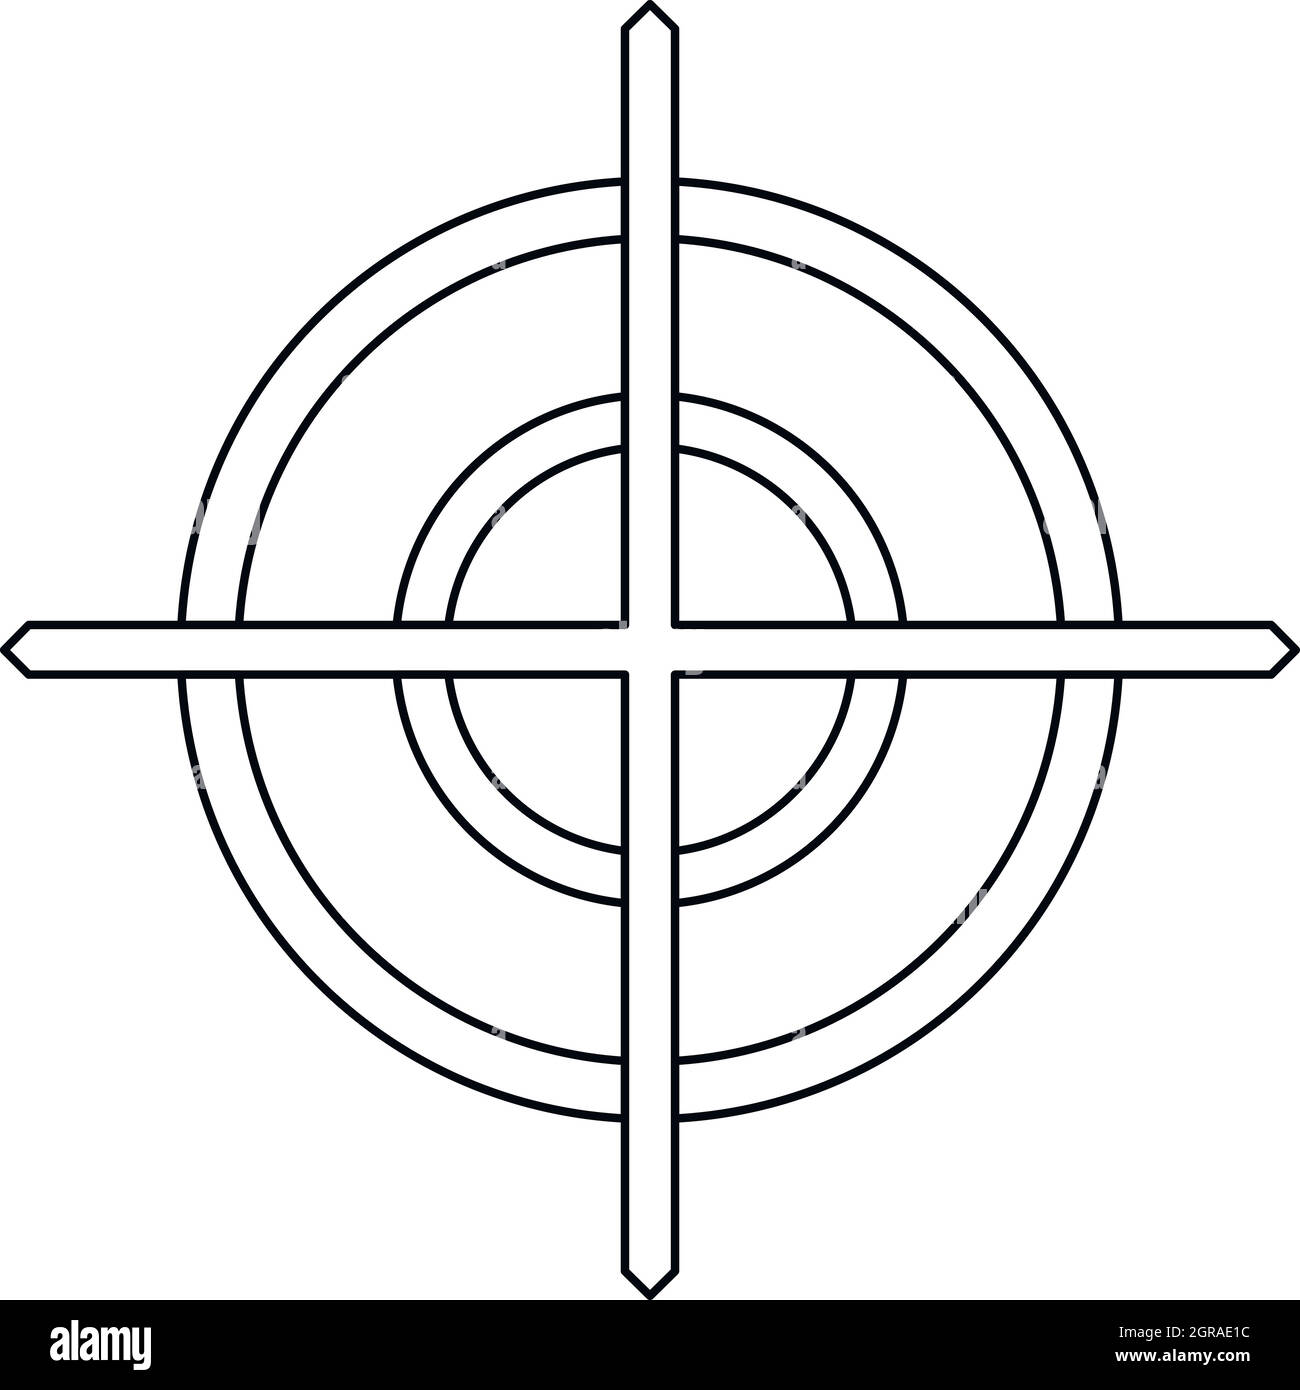 Crosshair icon in outline style Stock Vector